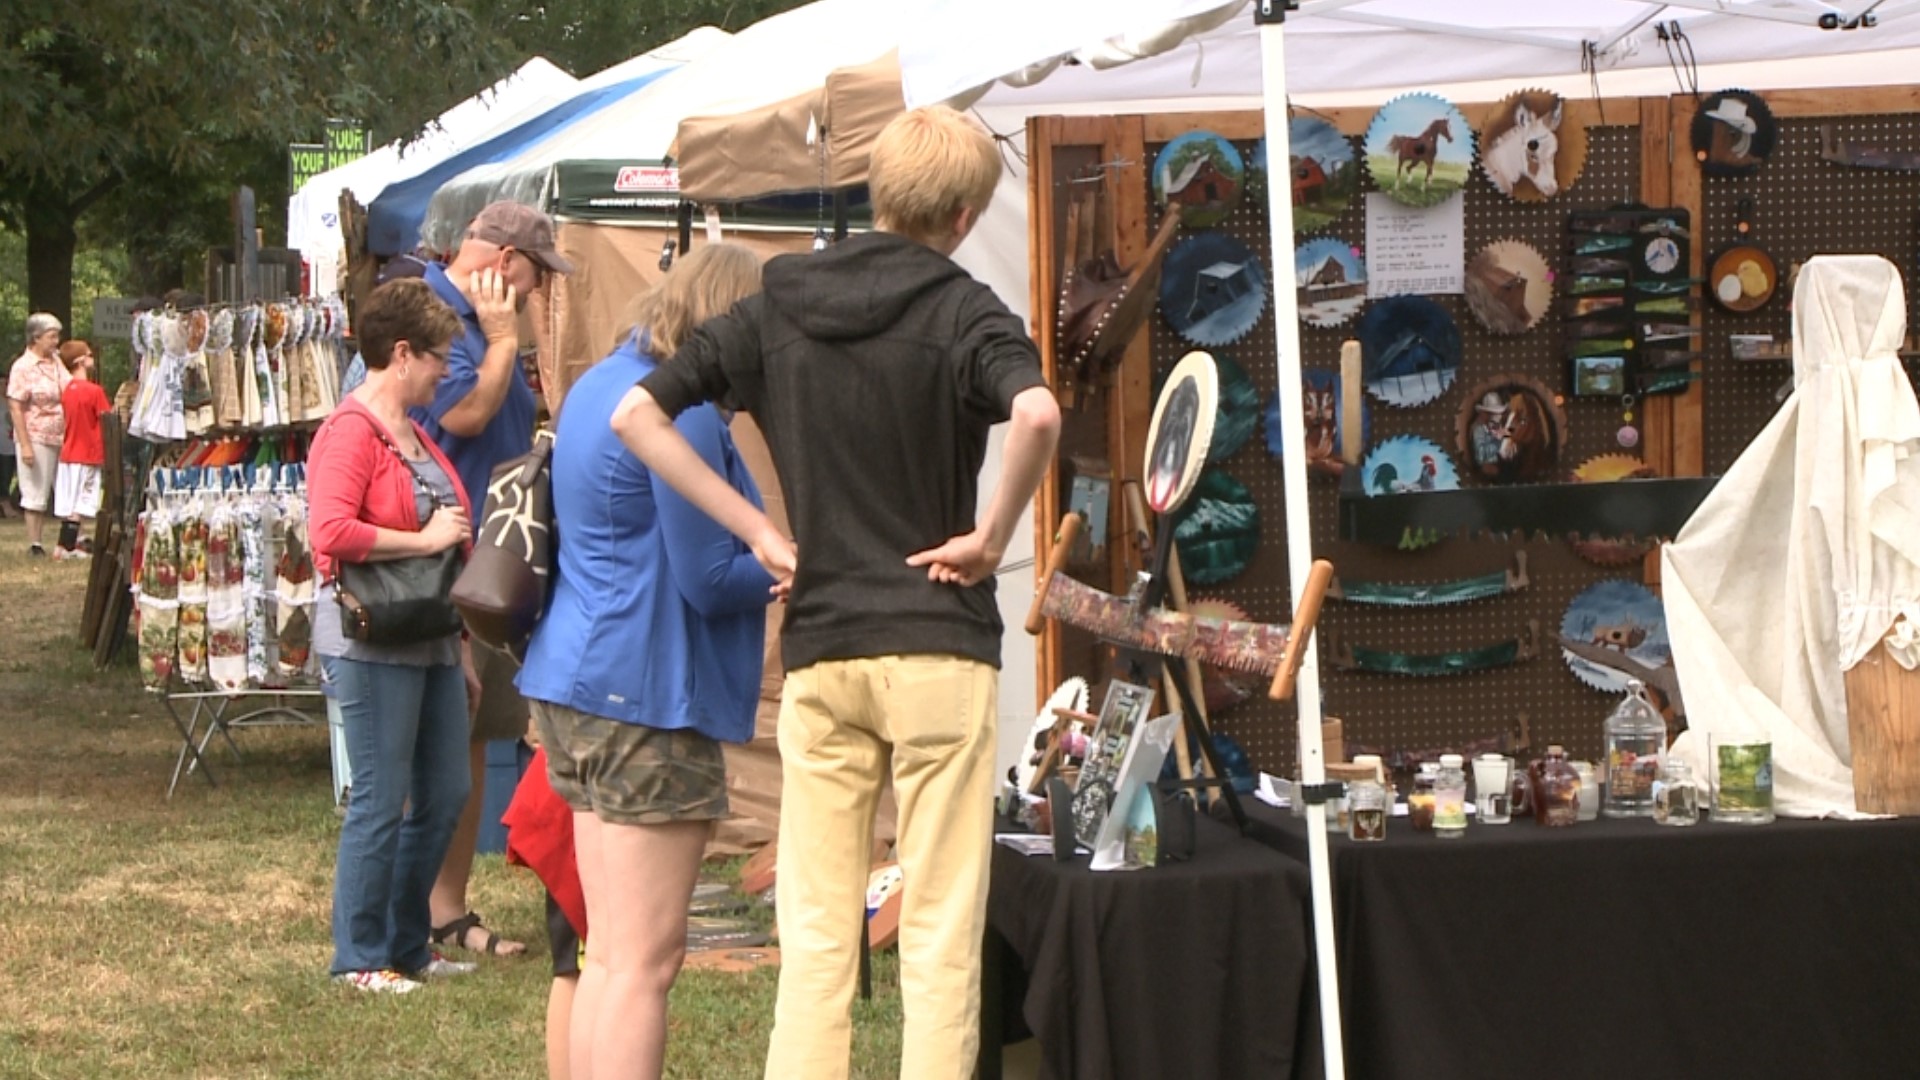 The Clothesline Fair was held at Battlefield Park in Prairie Grove. All proceeds go to schools and other groups with a good cause.